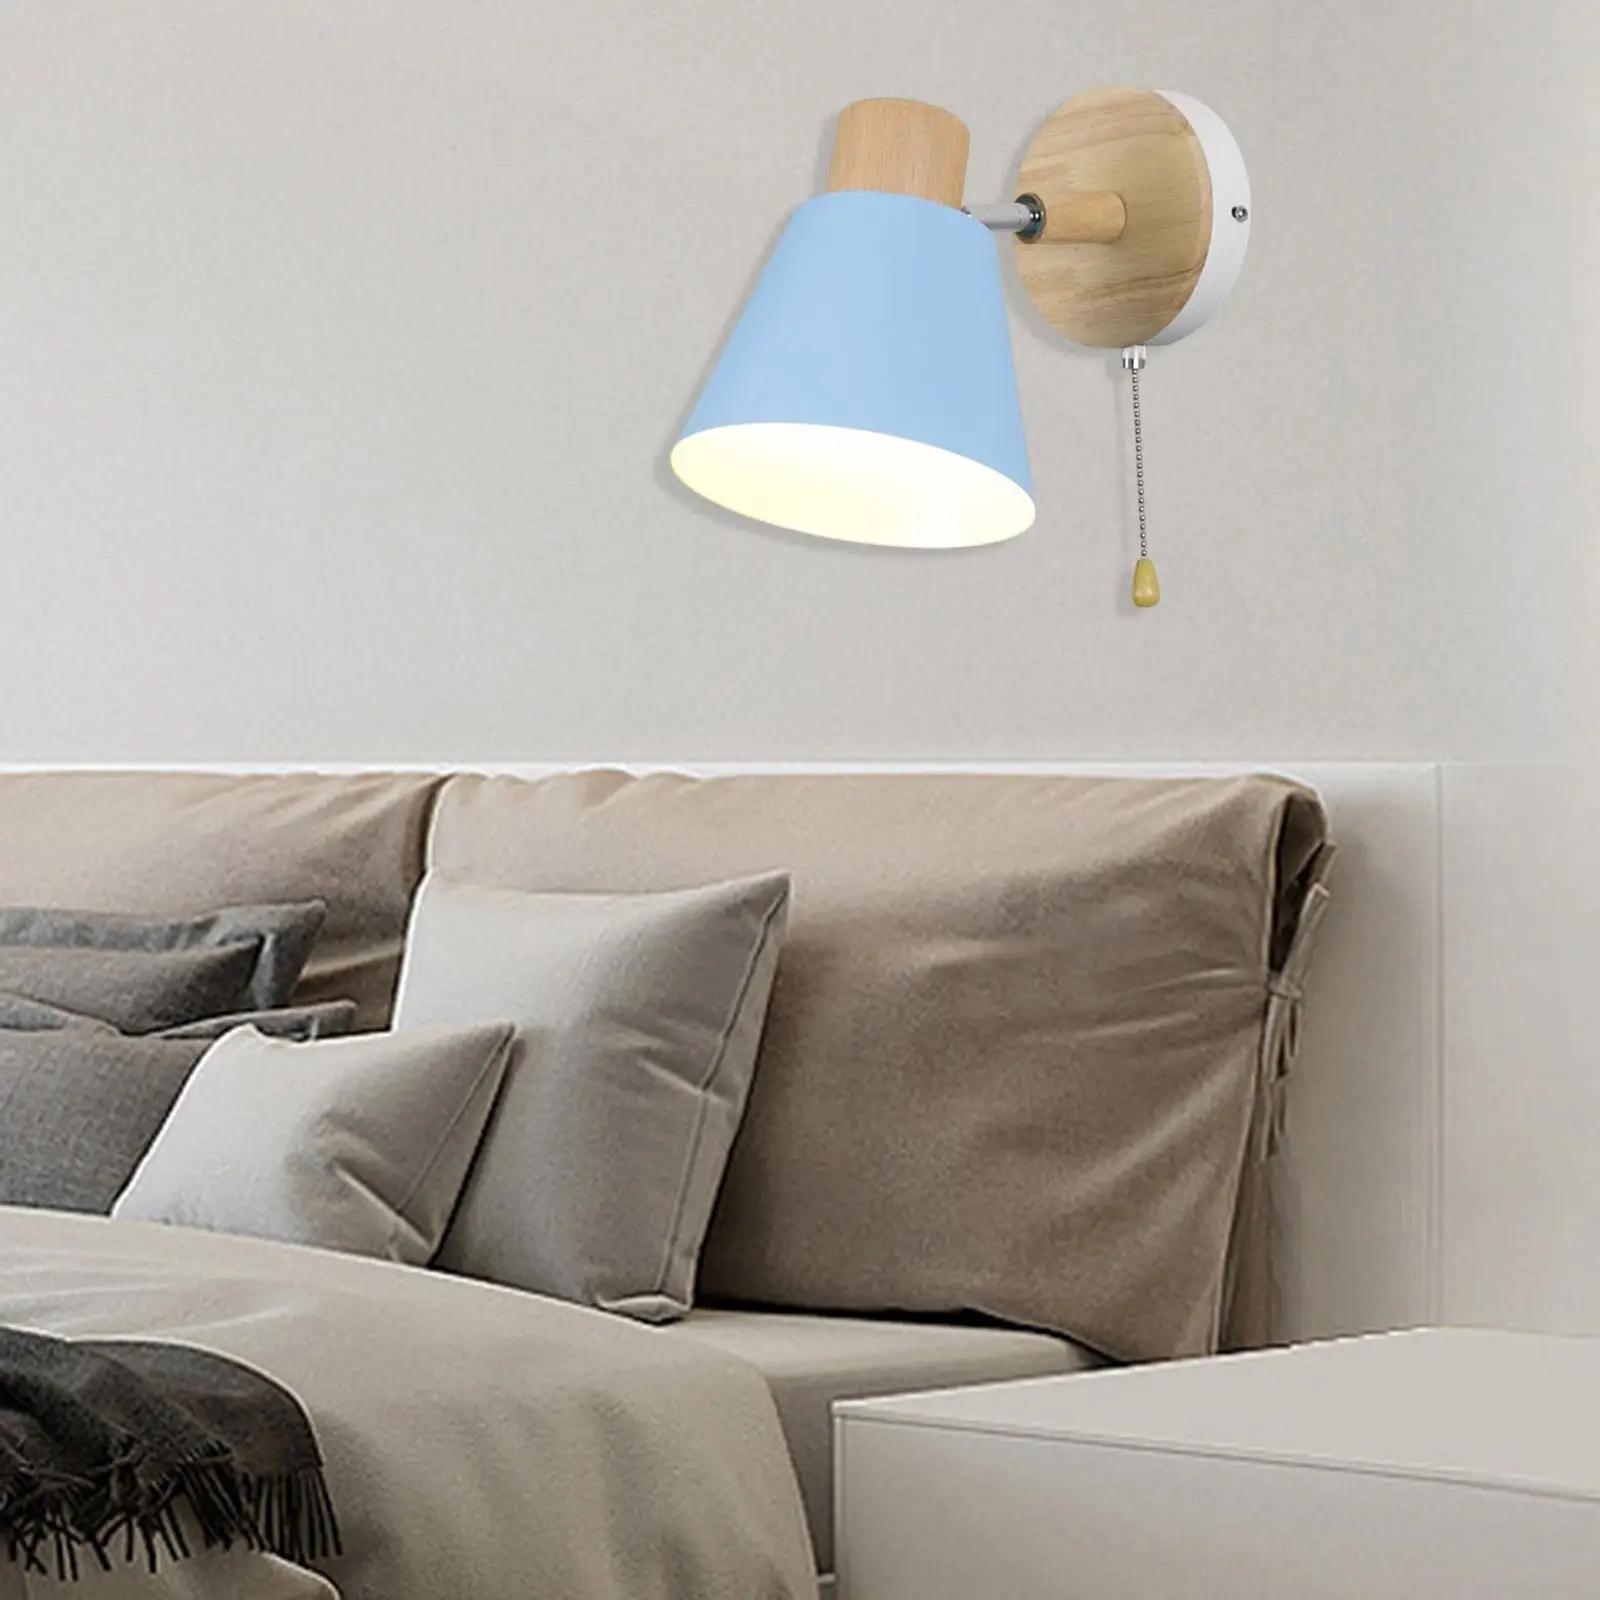 Modern Wall Lamp Light Sconce Bedside Lamp Creative with Pull Cord Switch Adjustable Lighting Fixture for Kitchen Bedroom Decor